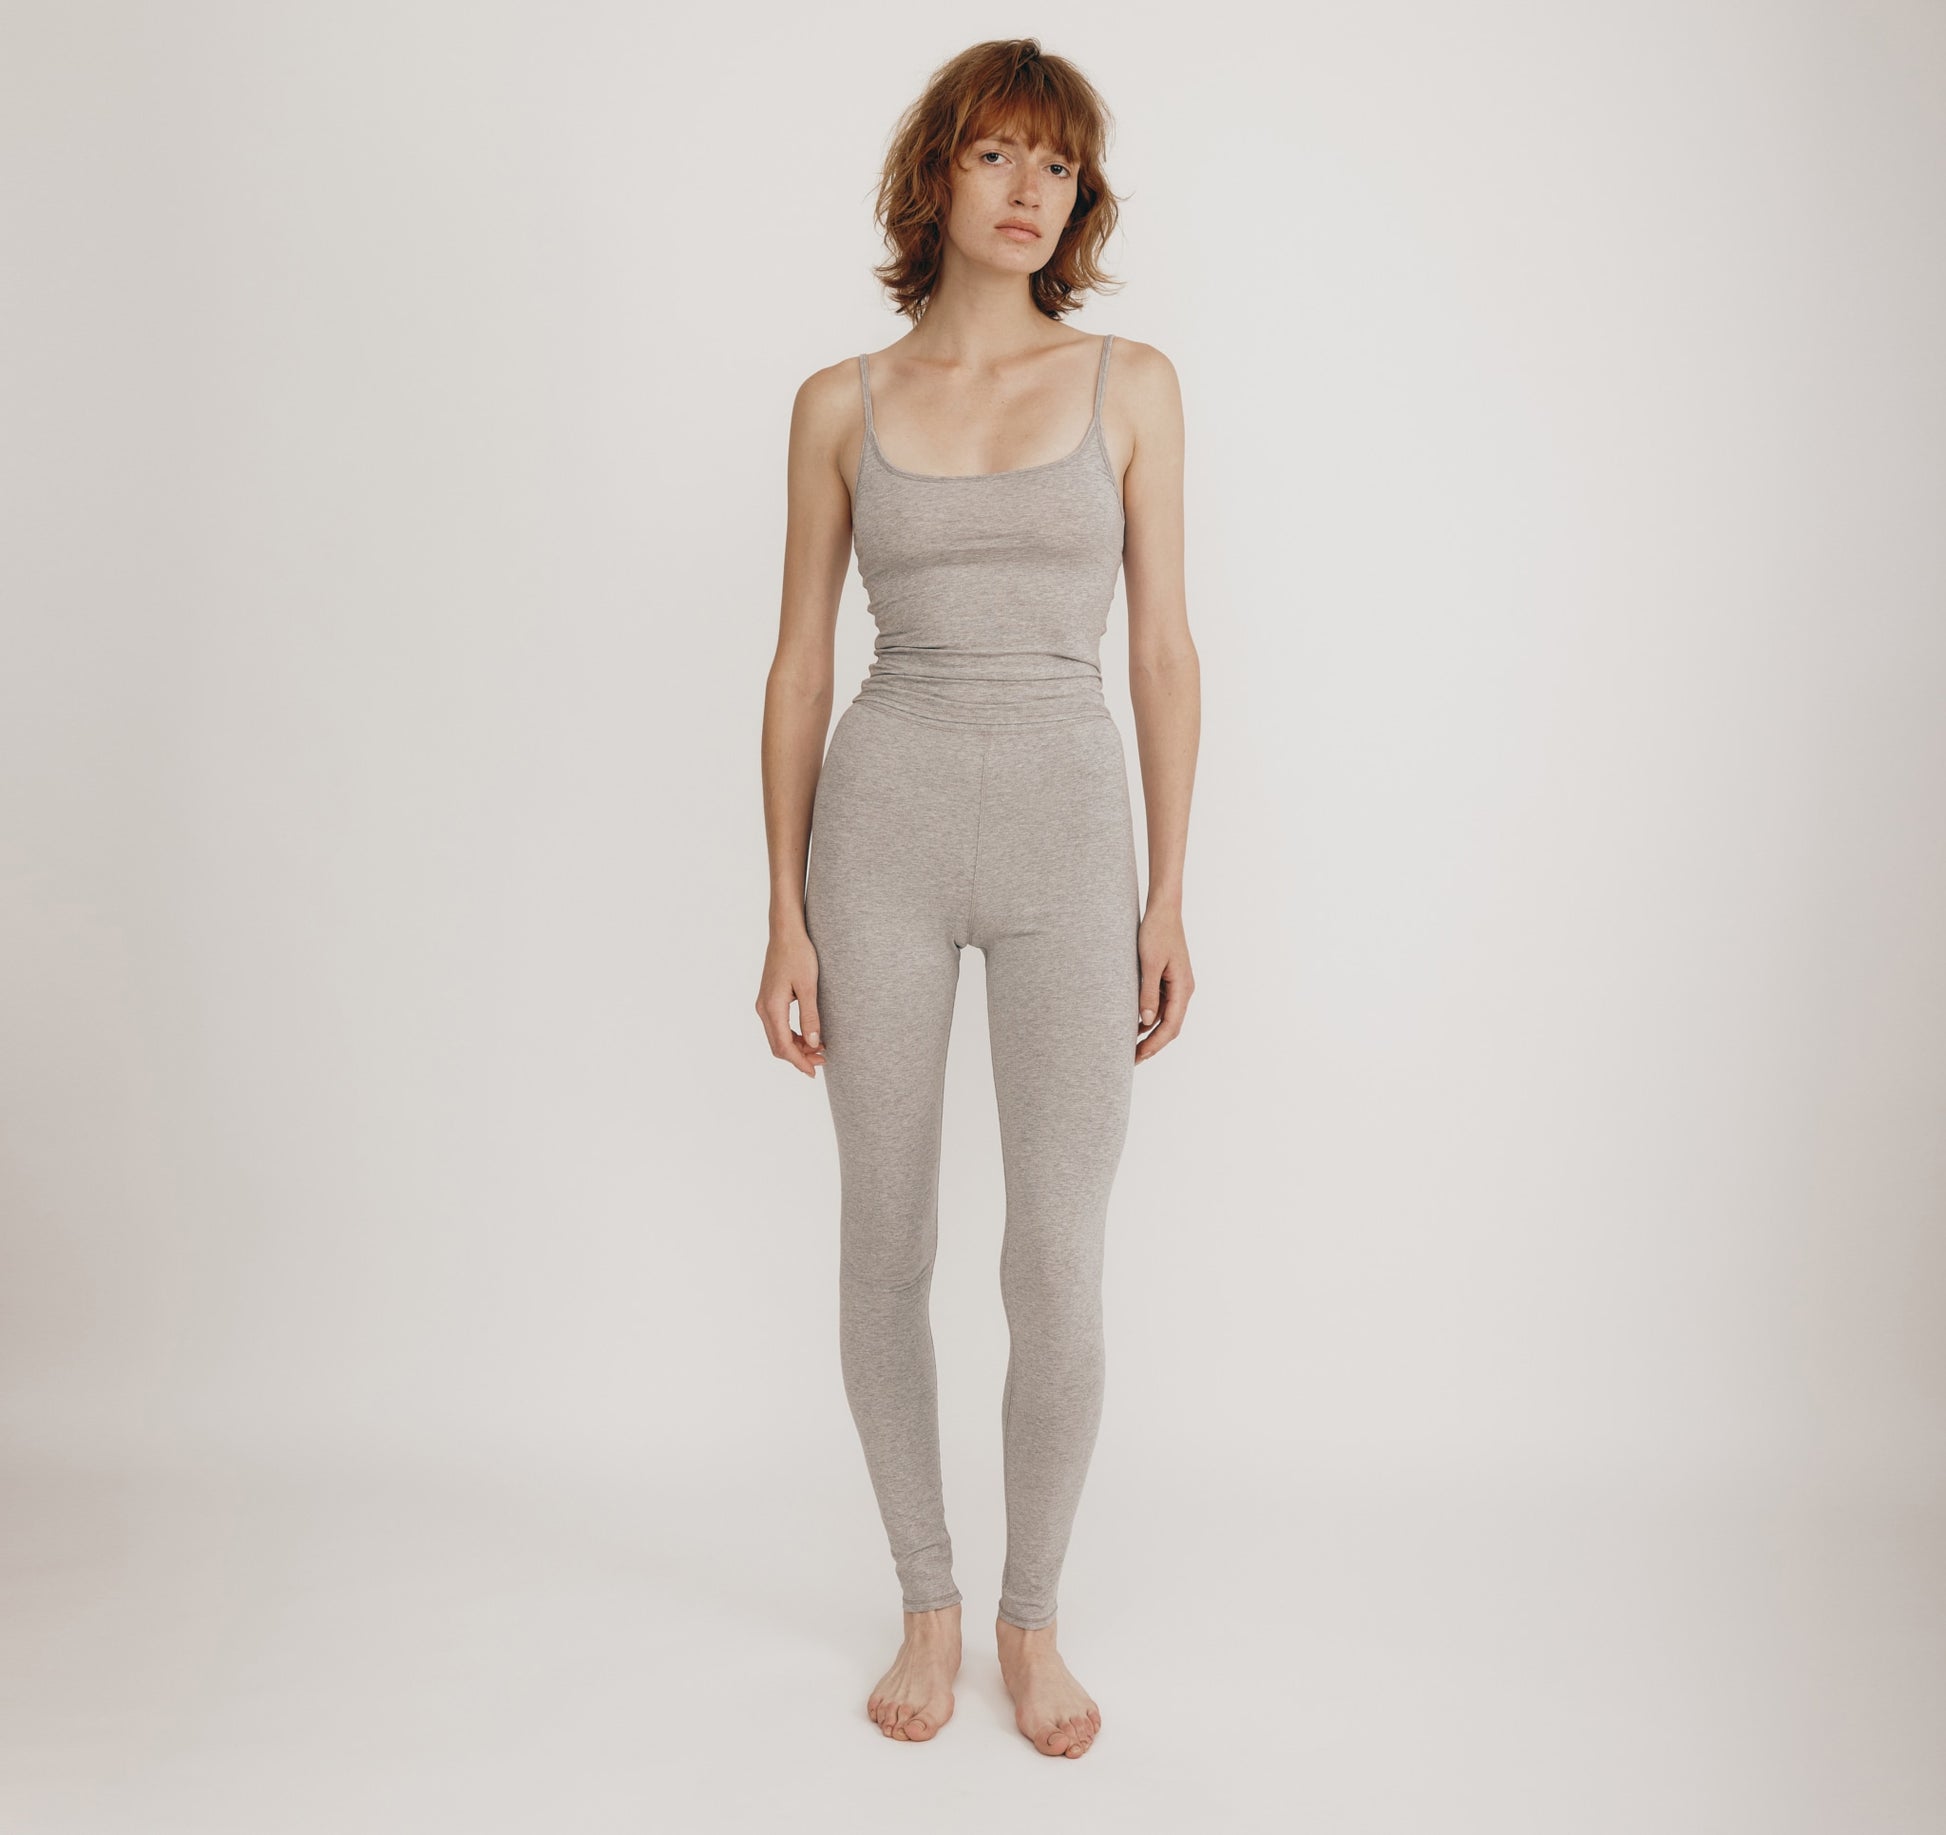 Women's Ribbed High Waist Legging made with Organic Cotton